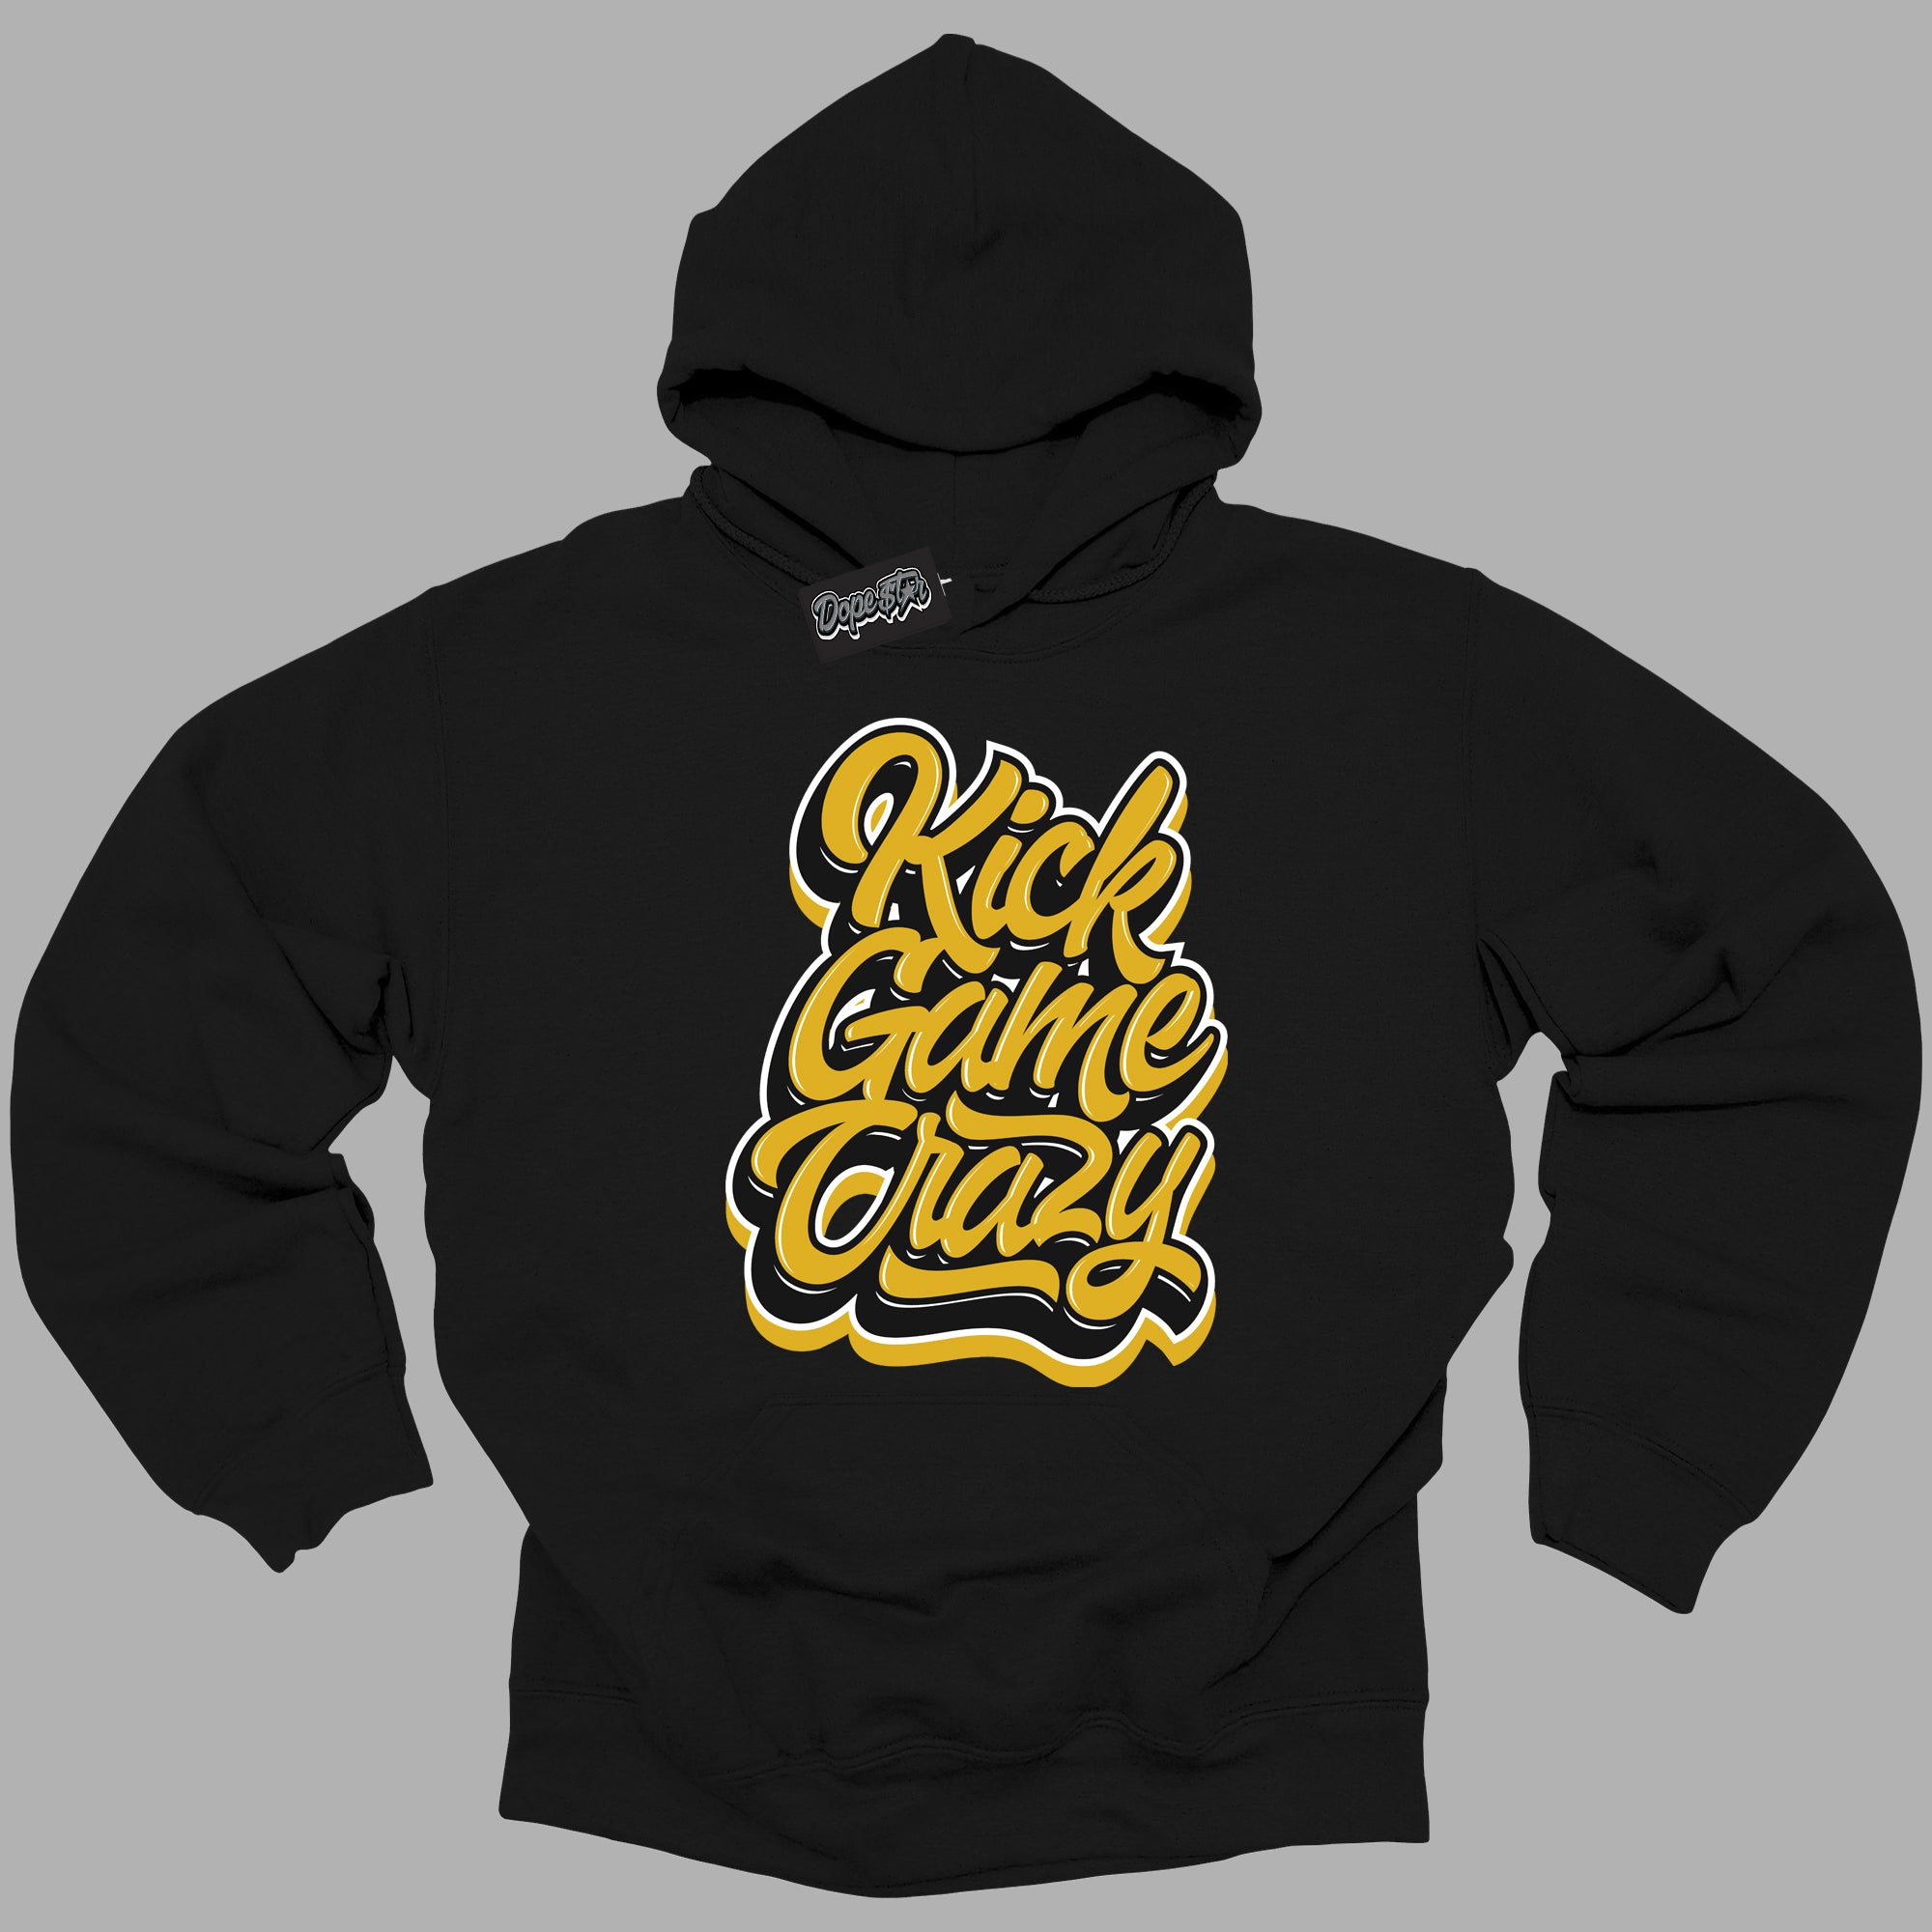 Cool Black Hoodie with “ Kick Game Crazy ”  design that Perfectly Matches Yellow Ochre 6s Sneakers.